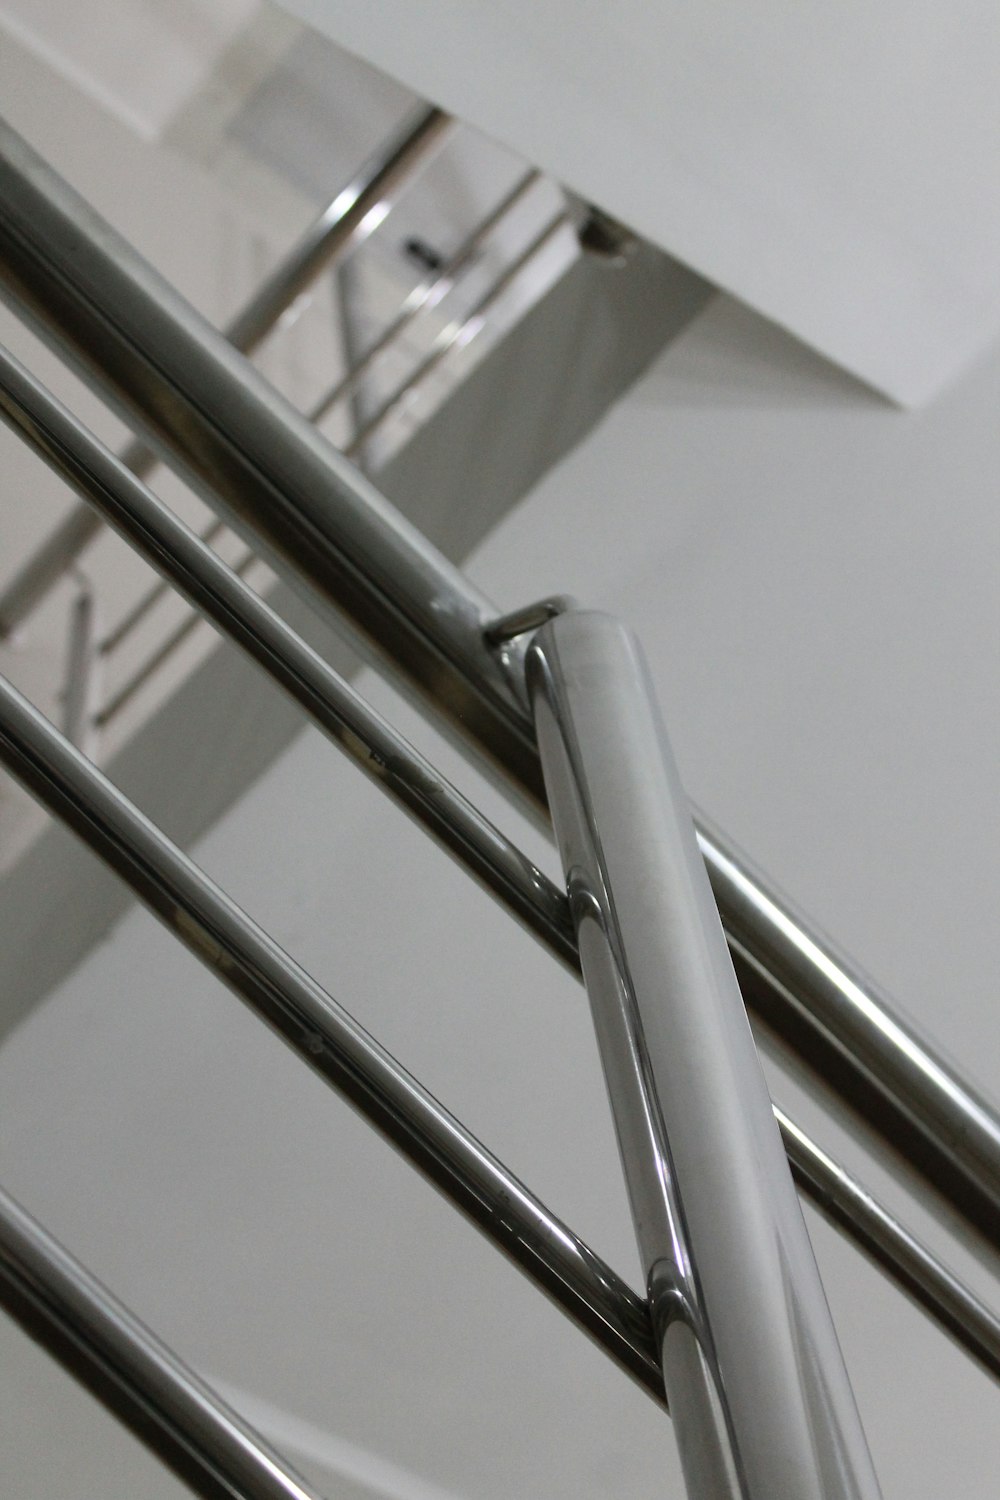 a close up view of a metal railing